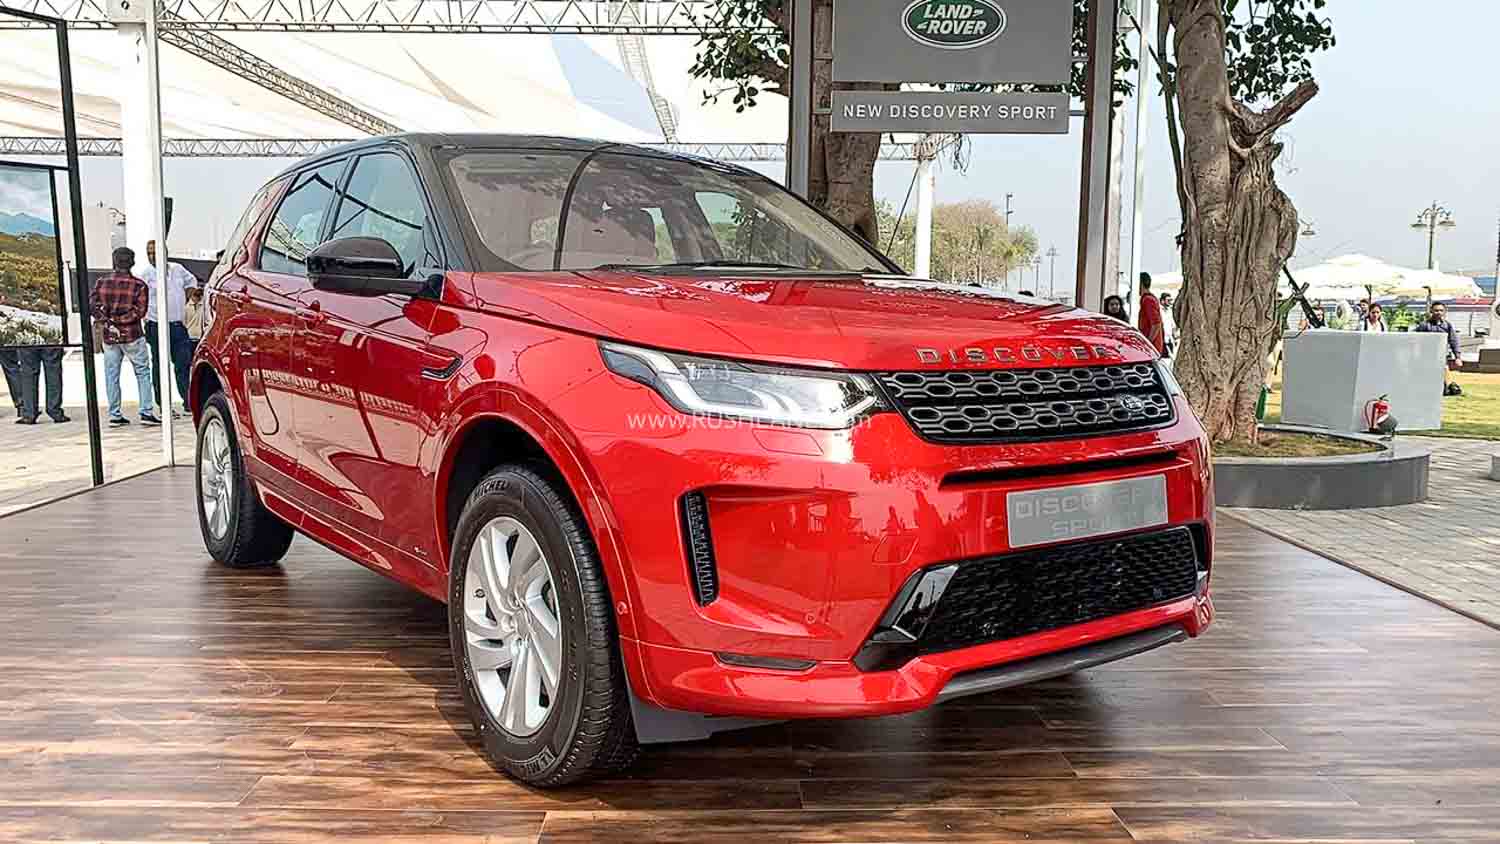 2020 Land Rover Discovery Sport Facelift